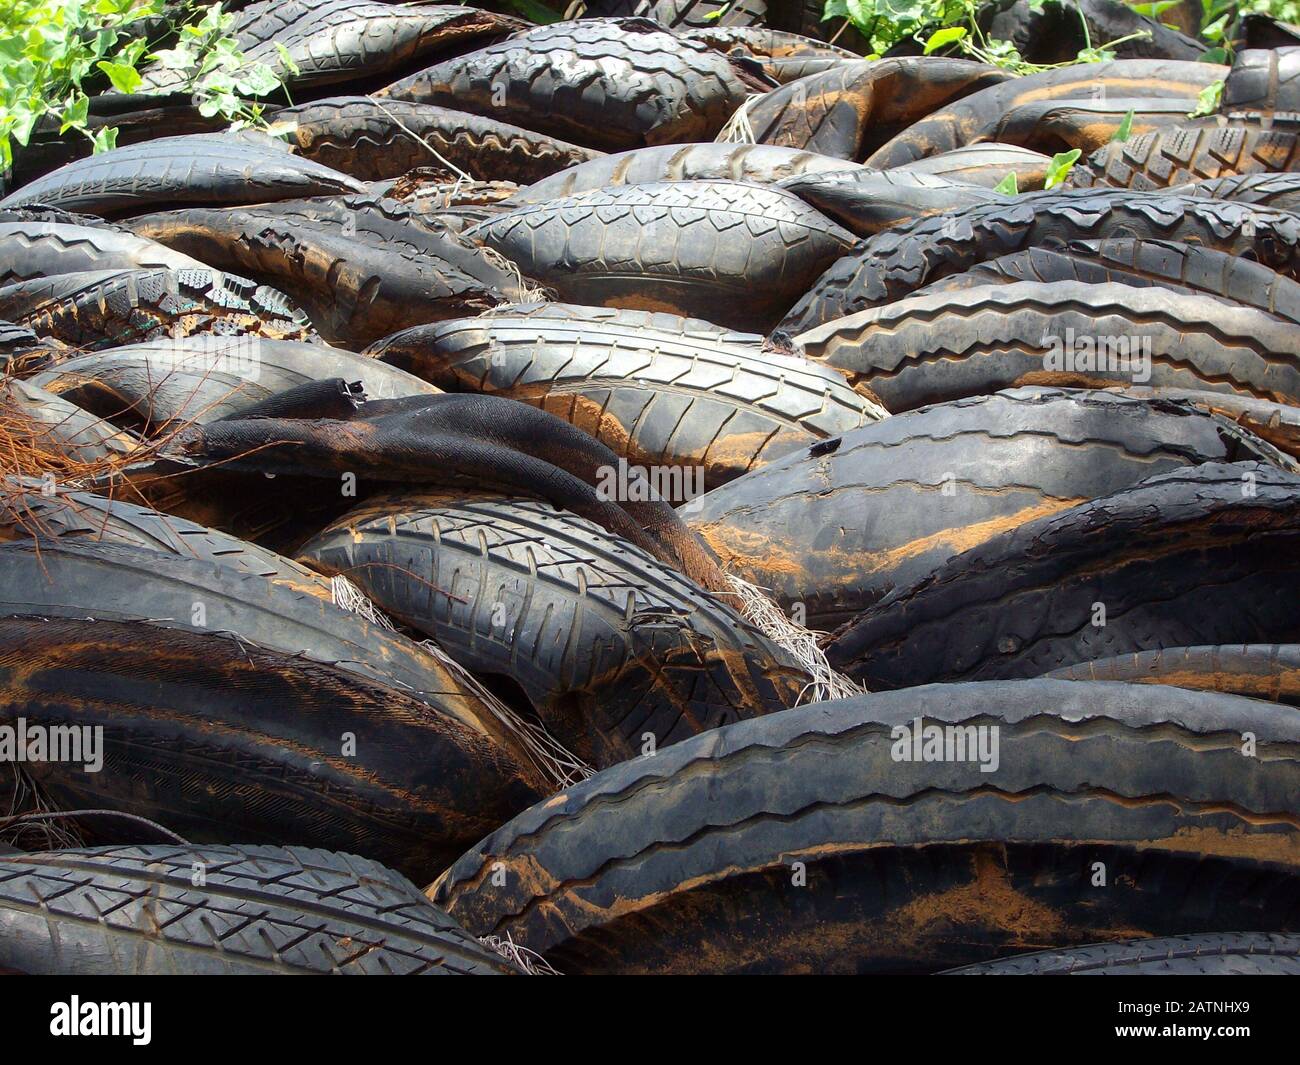 Pile of old tires squeezed together at a dump site Stock Photo